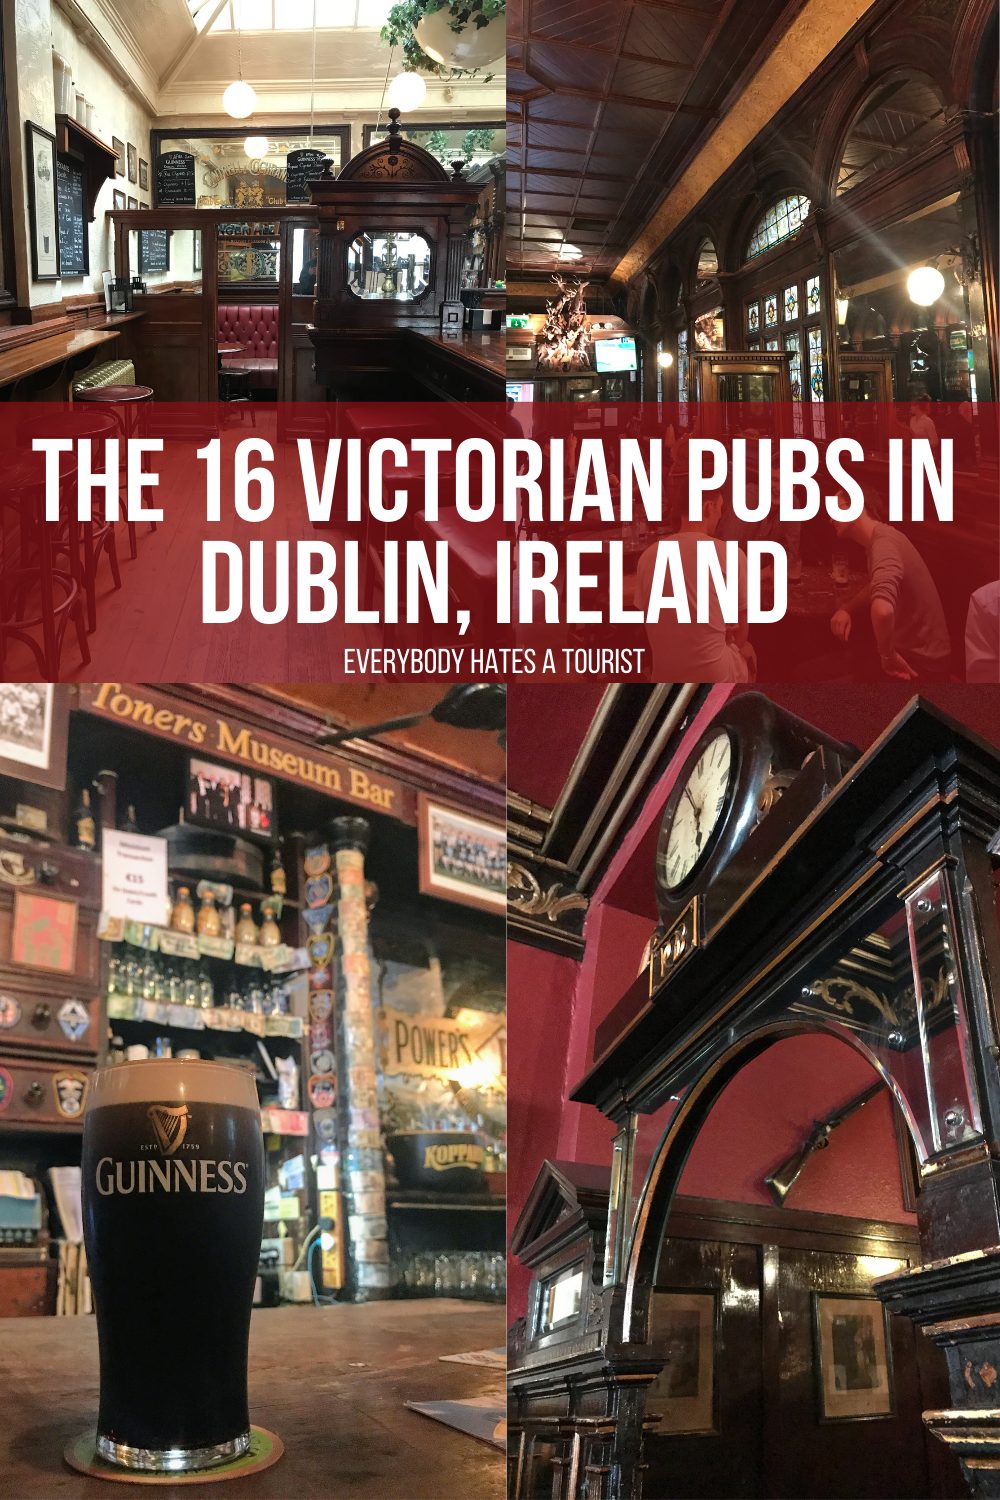 the 16 victorian pubs in dublin ireland - The 16 Victorian Pubs in Dublin, Ireland